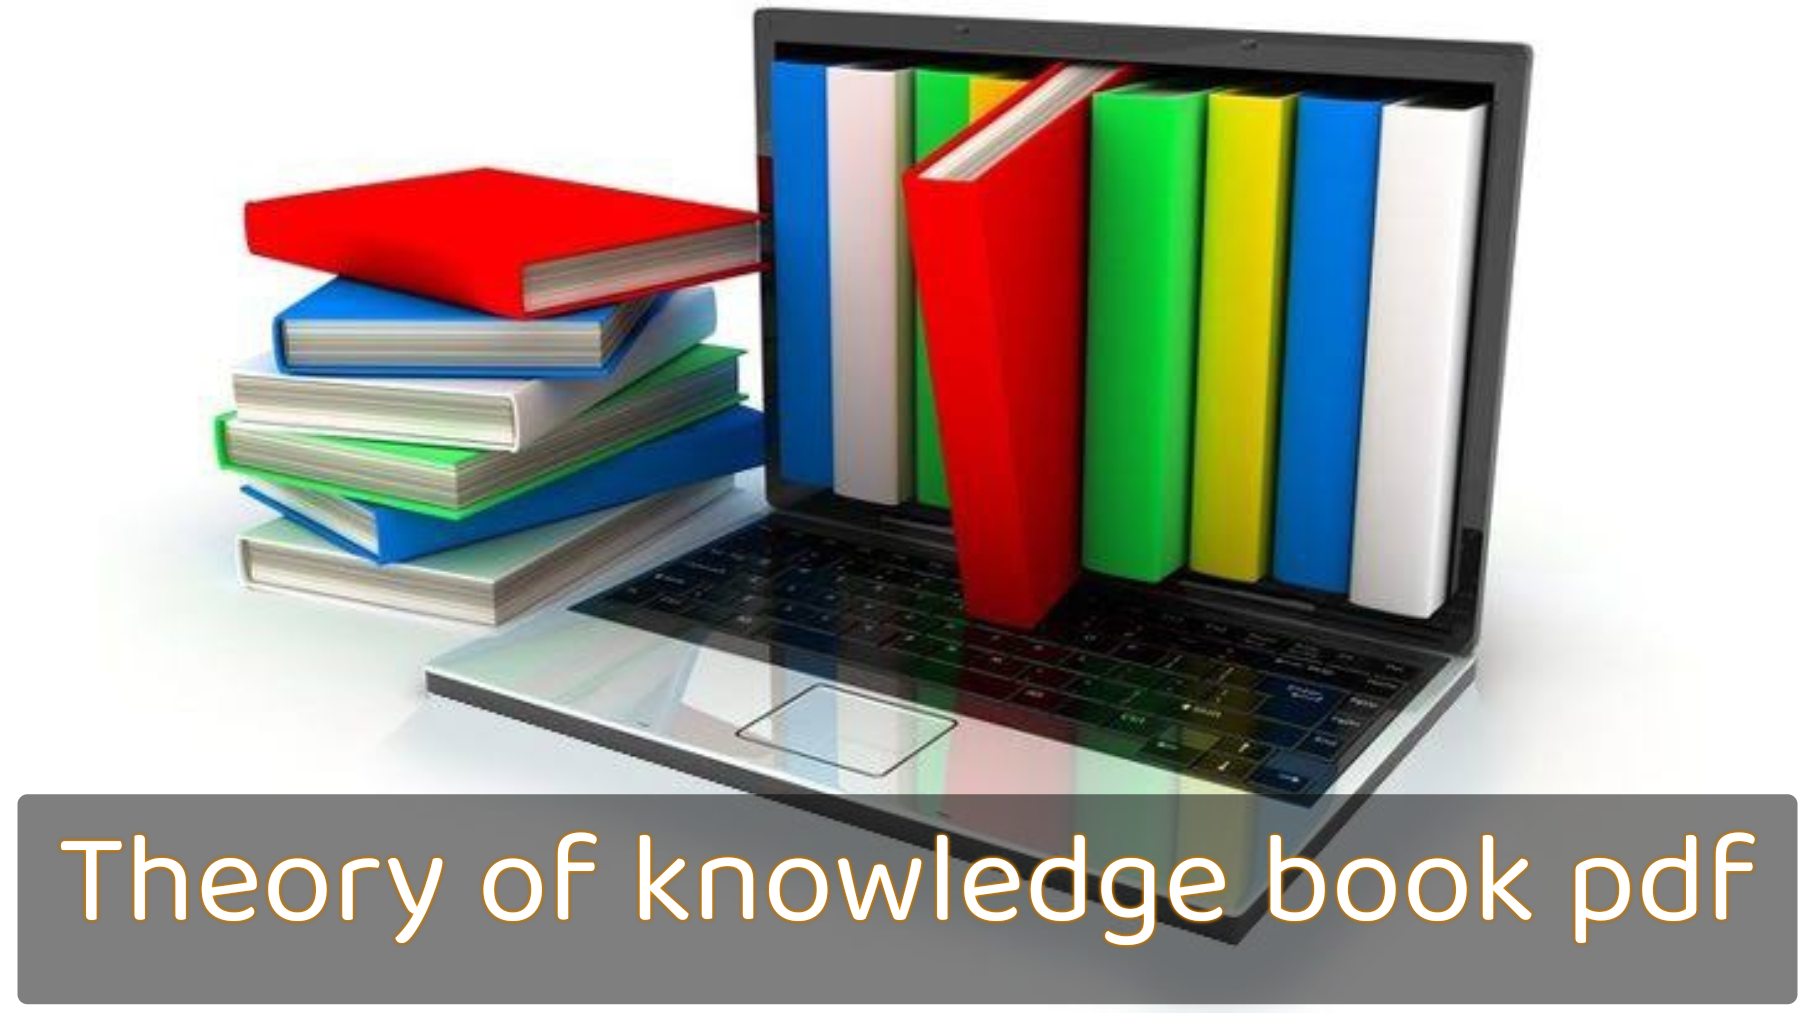 Theory of knowledge book pdf, Theory of knowledge for the ib diploma, Ib theory of knowledge textbook, Ib theory of knowledge textbook pdf